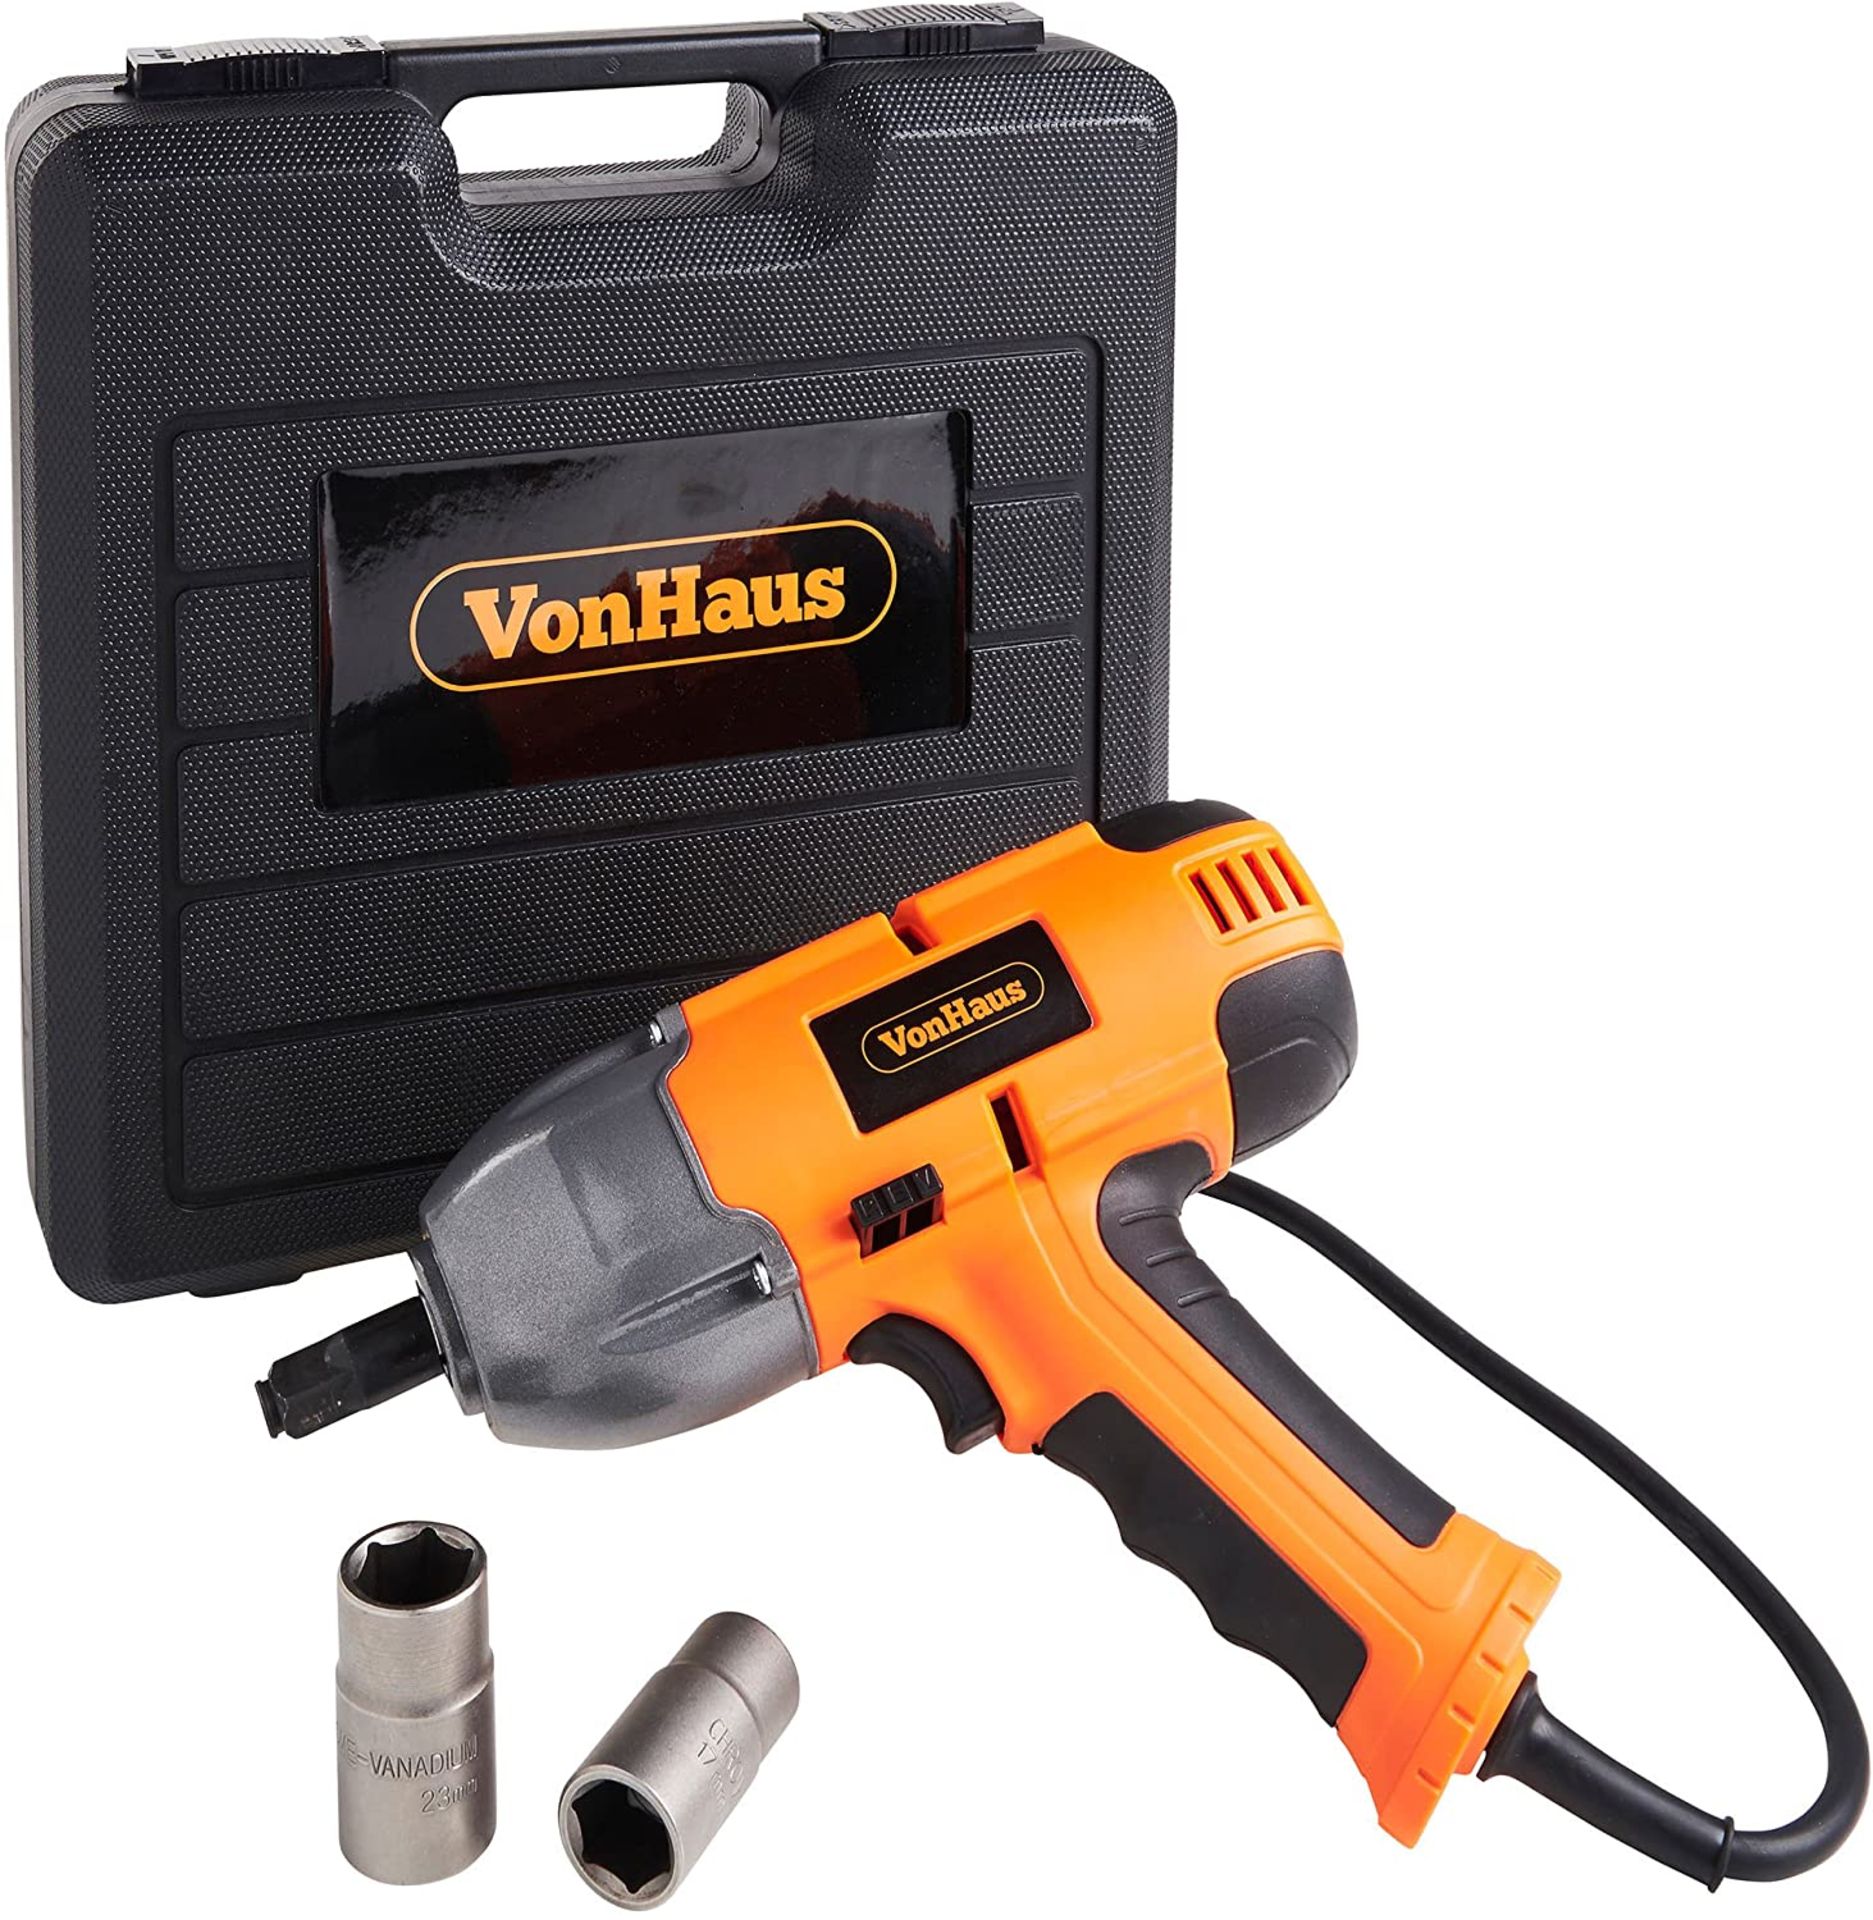 (GE45) Electric Impact Wrench Driver 230V – 500Nm – ½ inch Square Drive – 6000rpm Variab... - Image 3 of 3